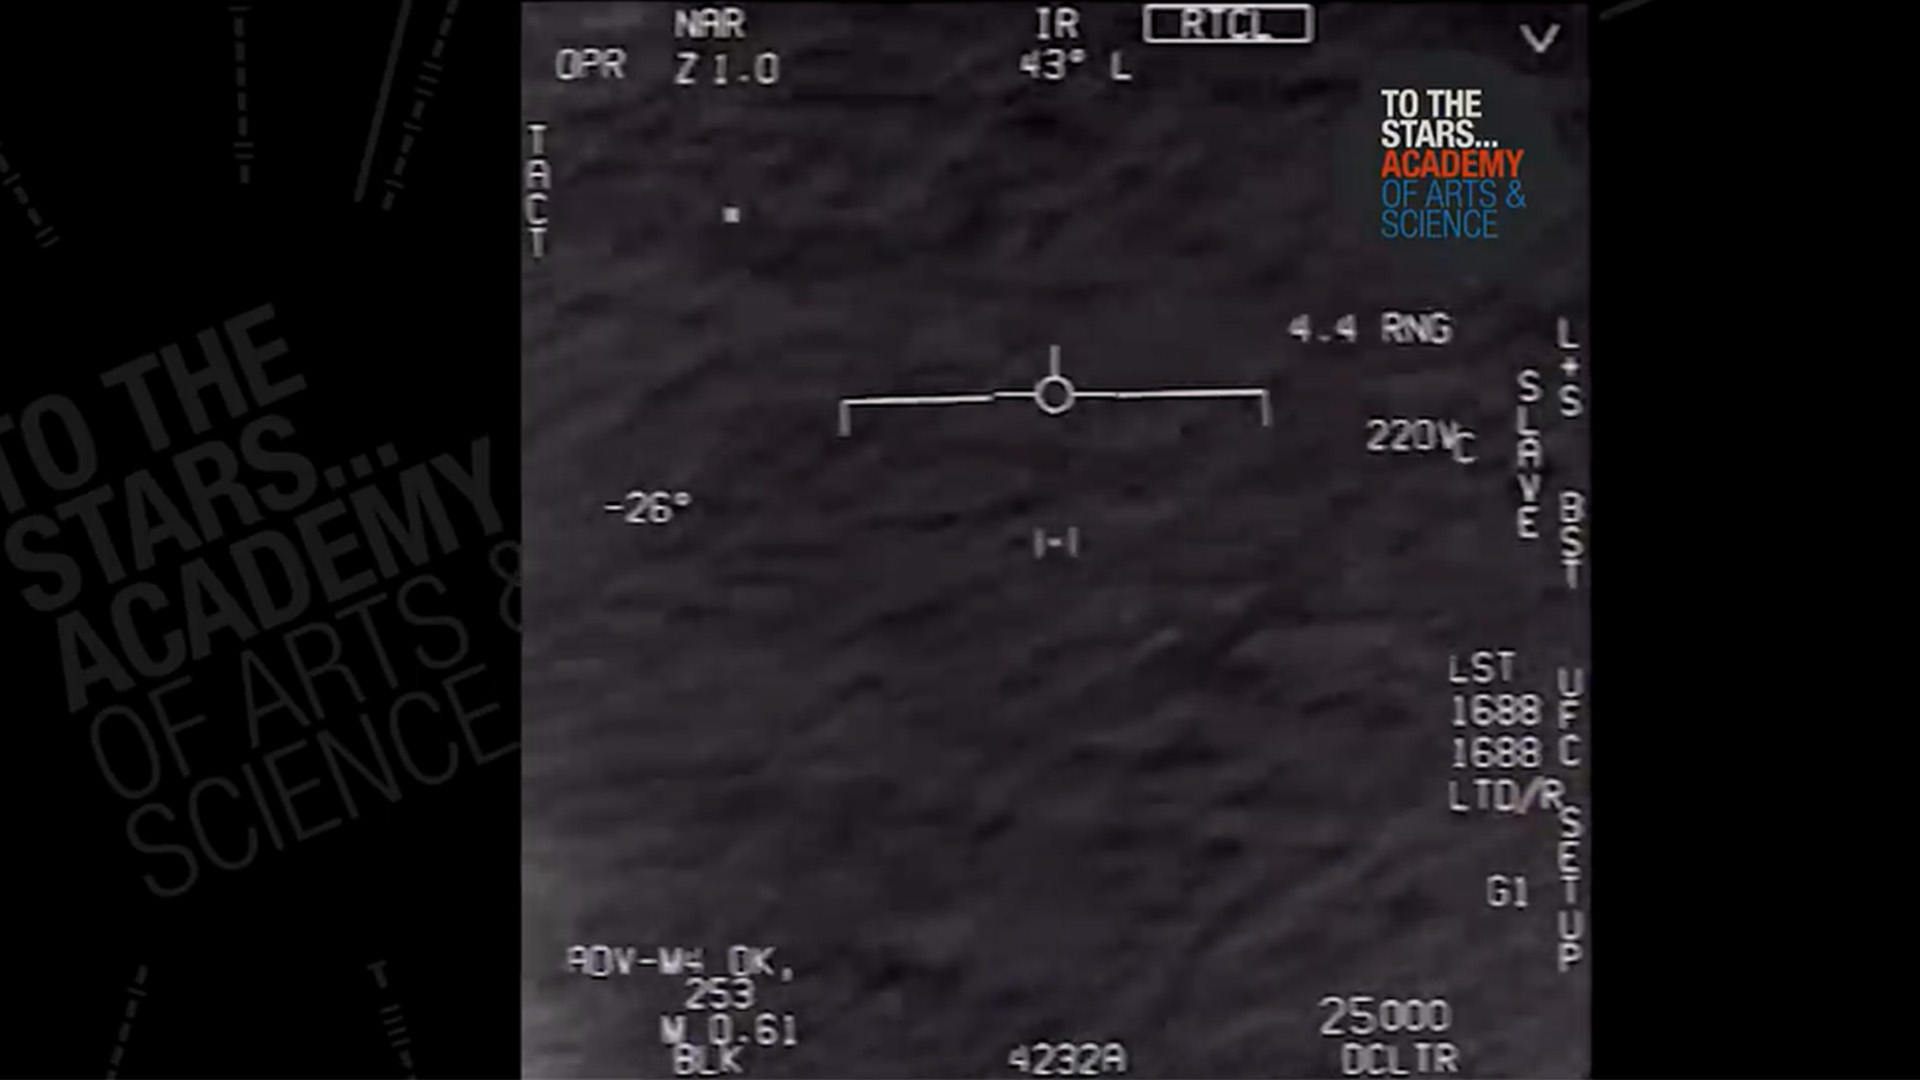 Former US Navy fighter pilot shares story of UFO sightings ahead